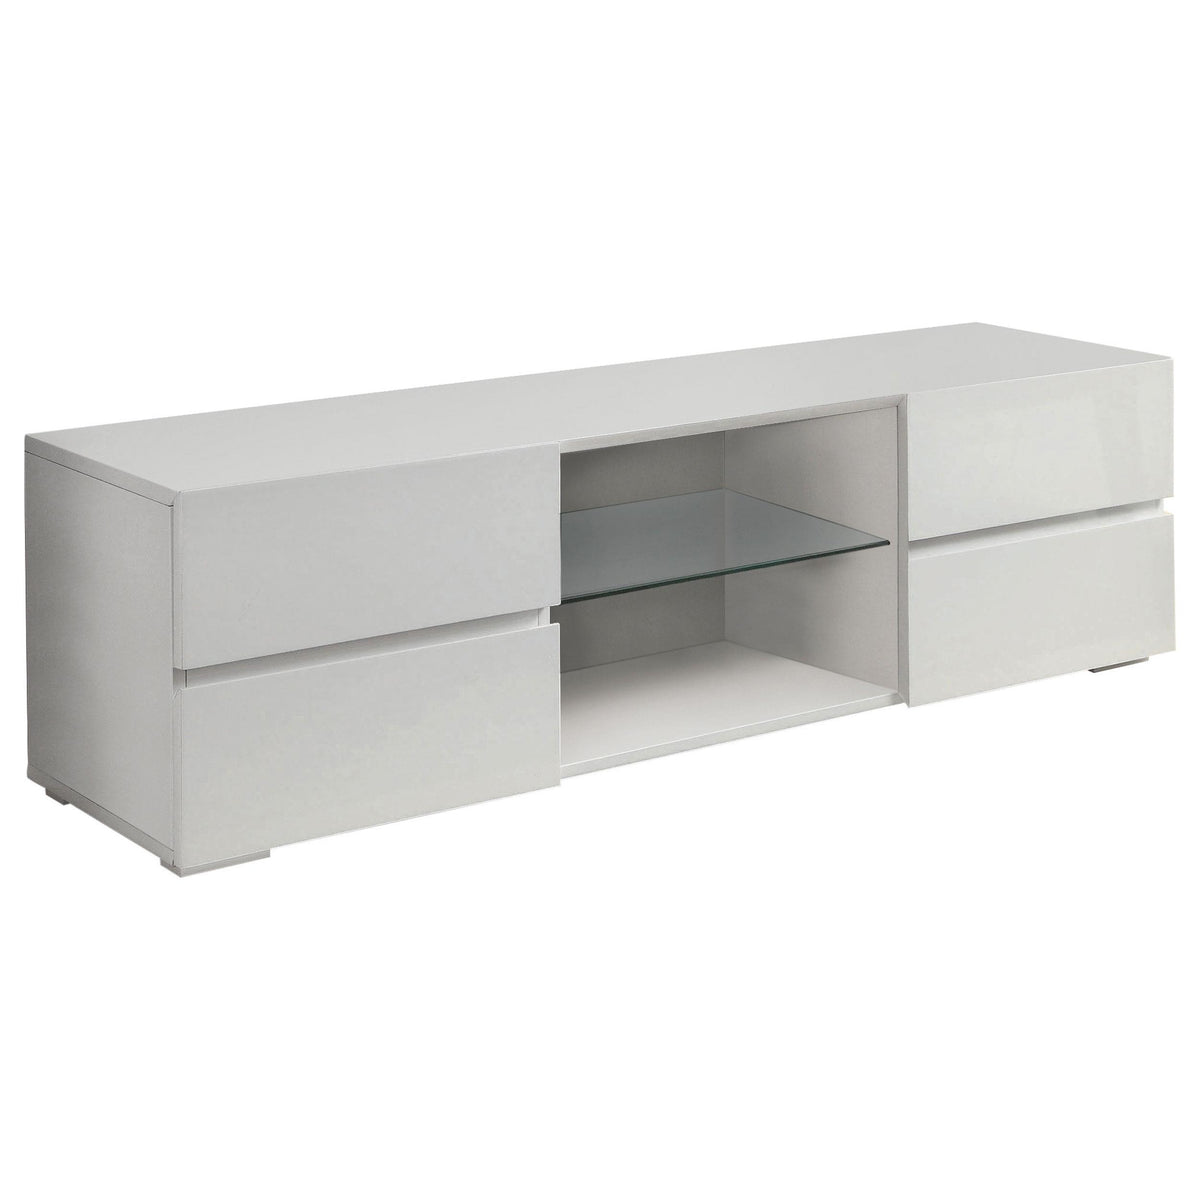 Galvin 4-drawer TV Console Glossy White Galvin 4-drawer TV Console Glossy White Half Price Furniture